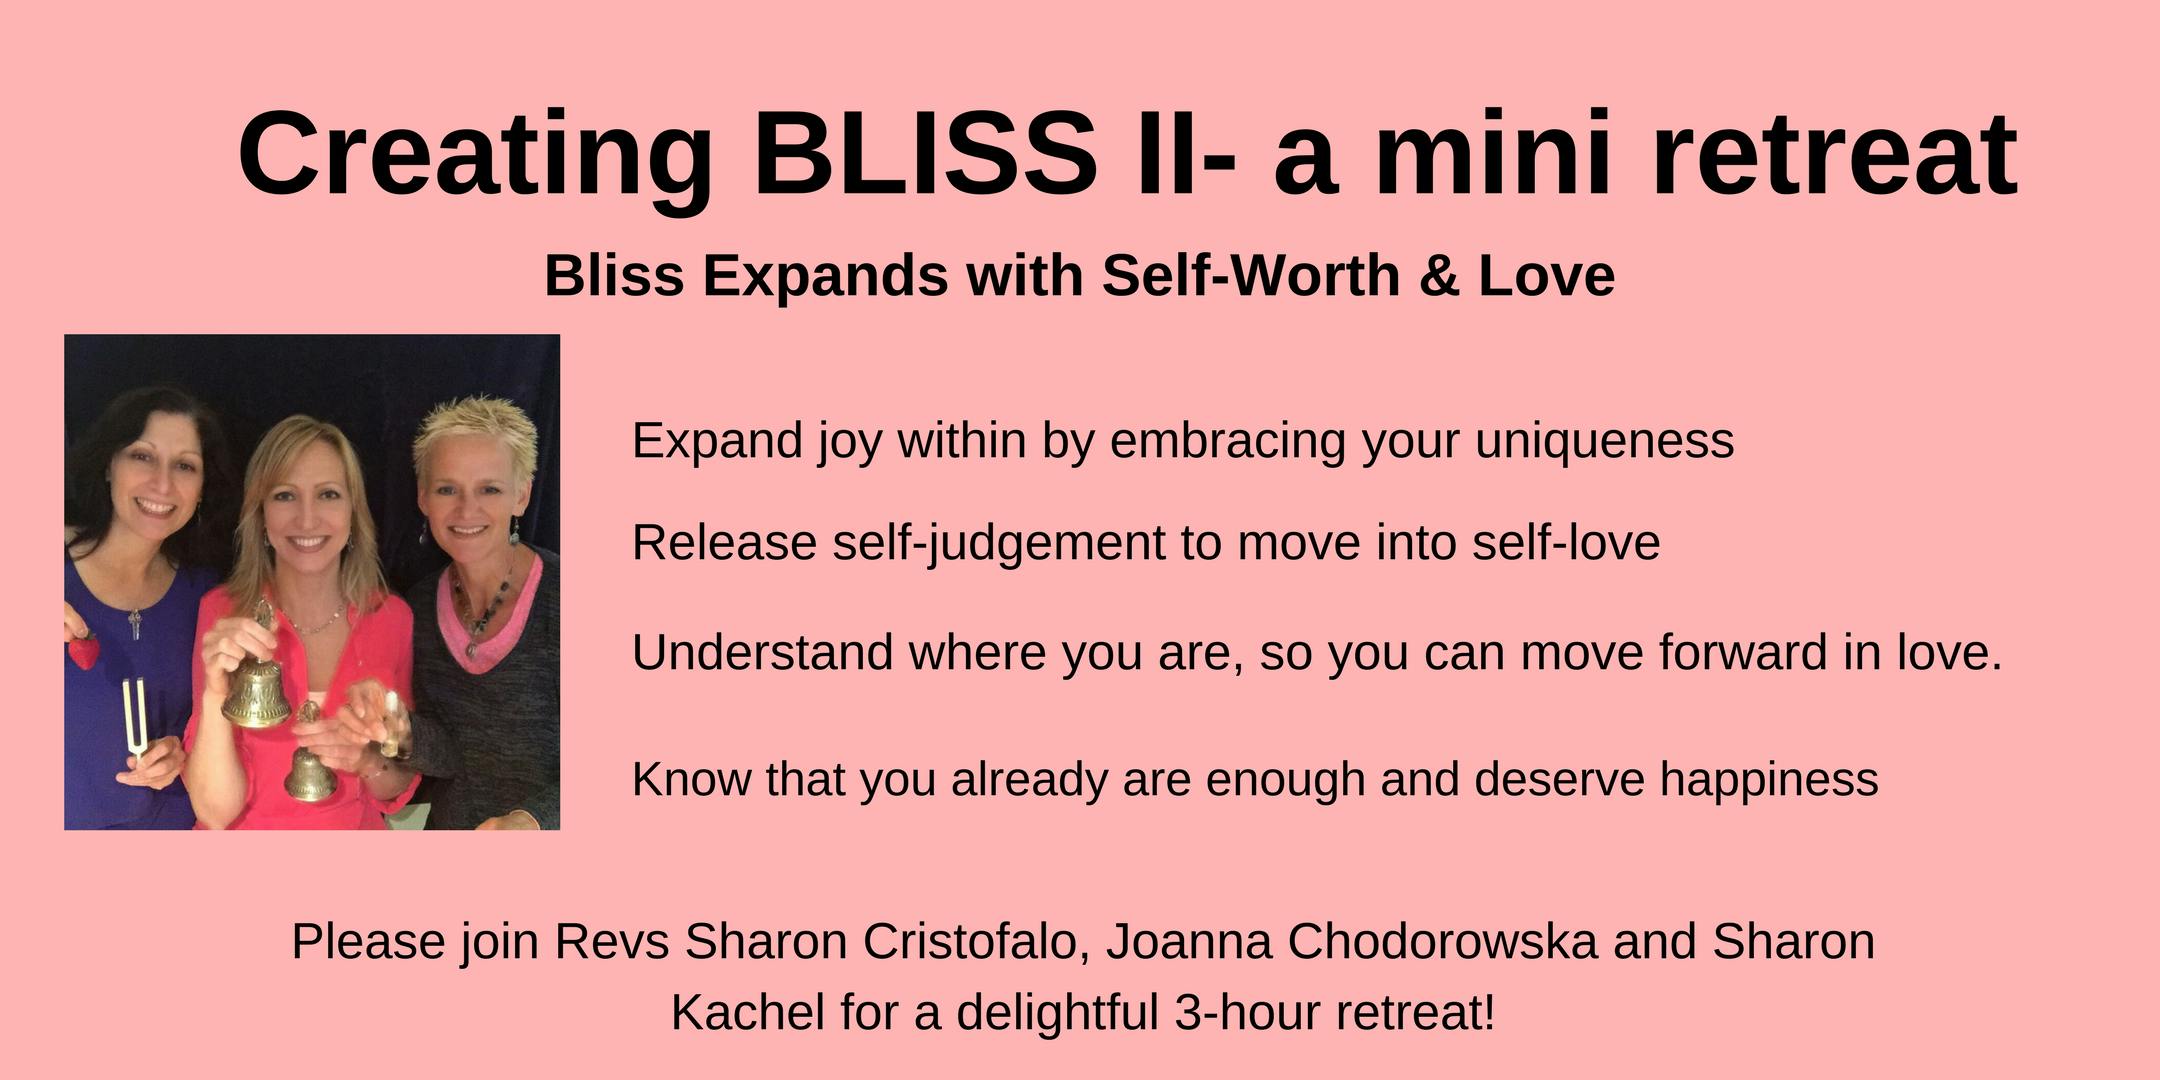 Bliss Expands with Self-Worth & Love - a mini retreat